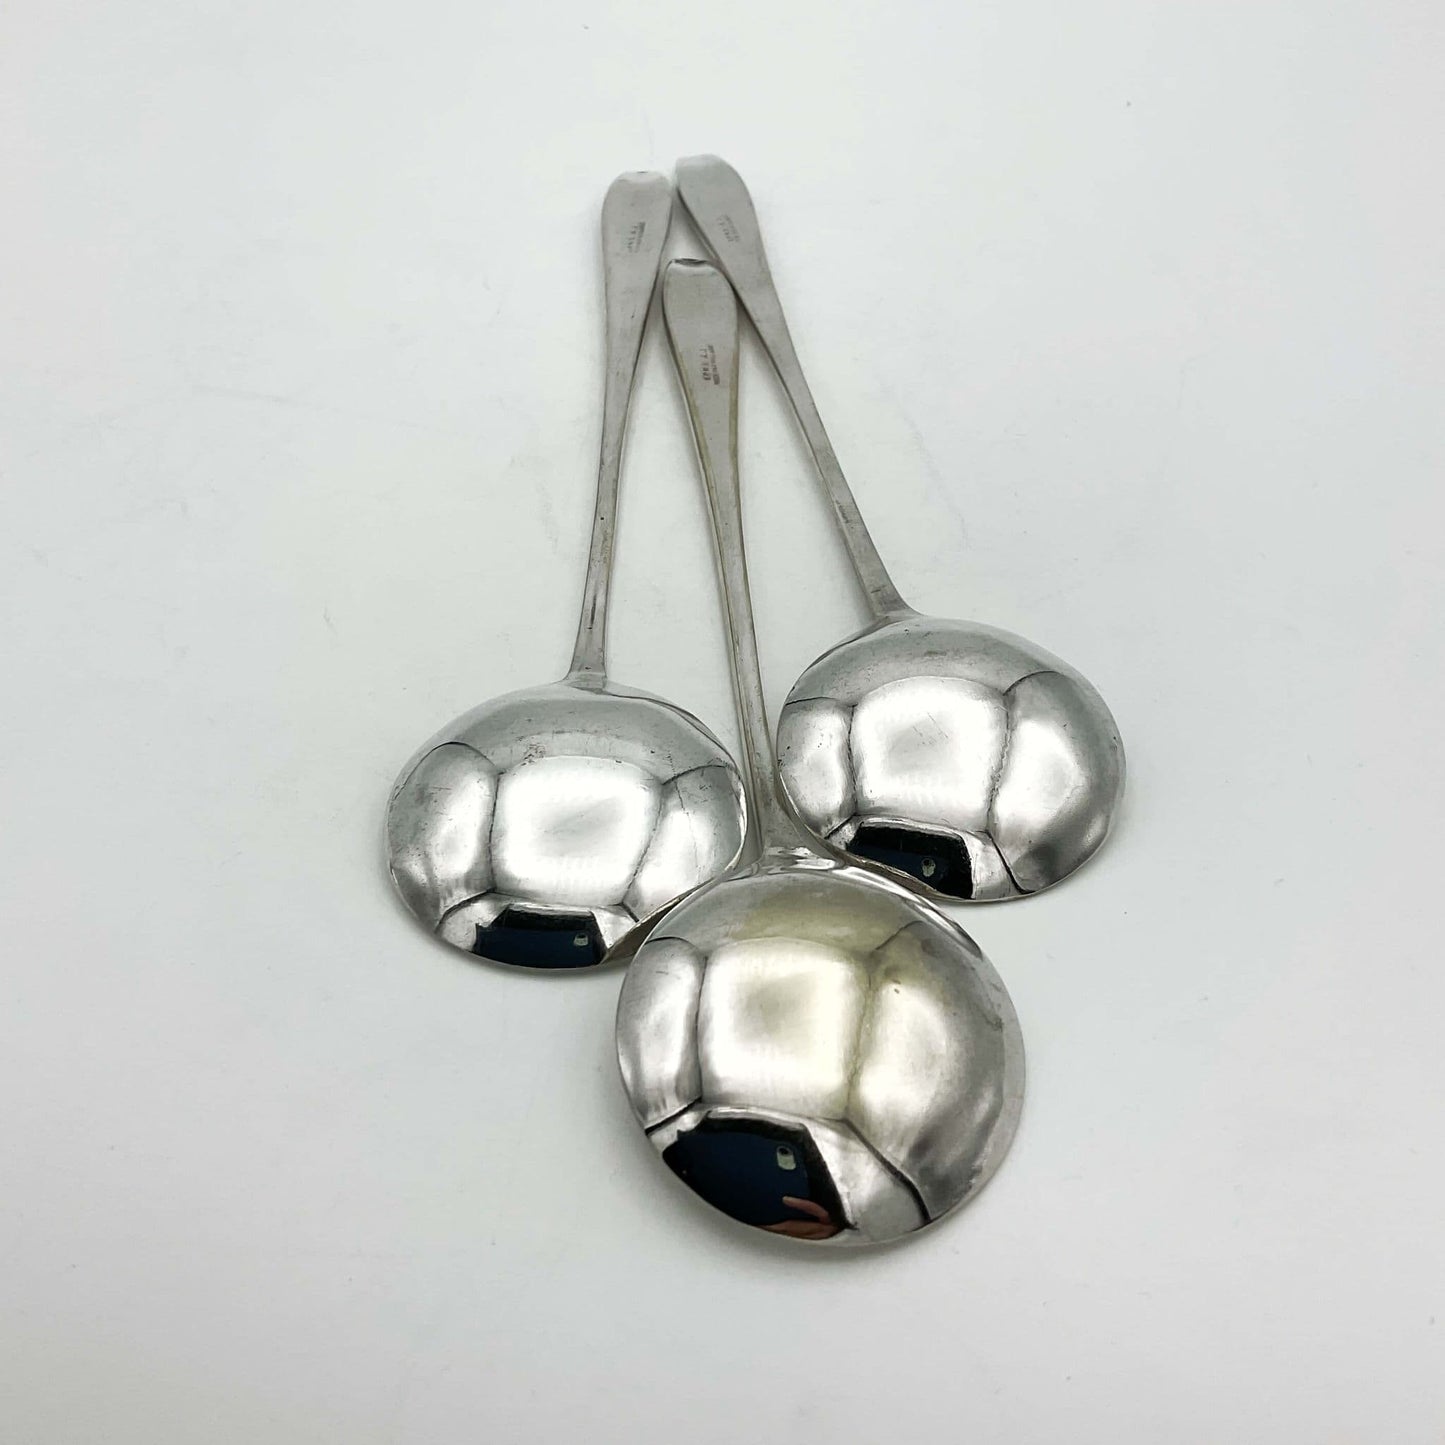 Silver Plated Long Handled Spoons Set